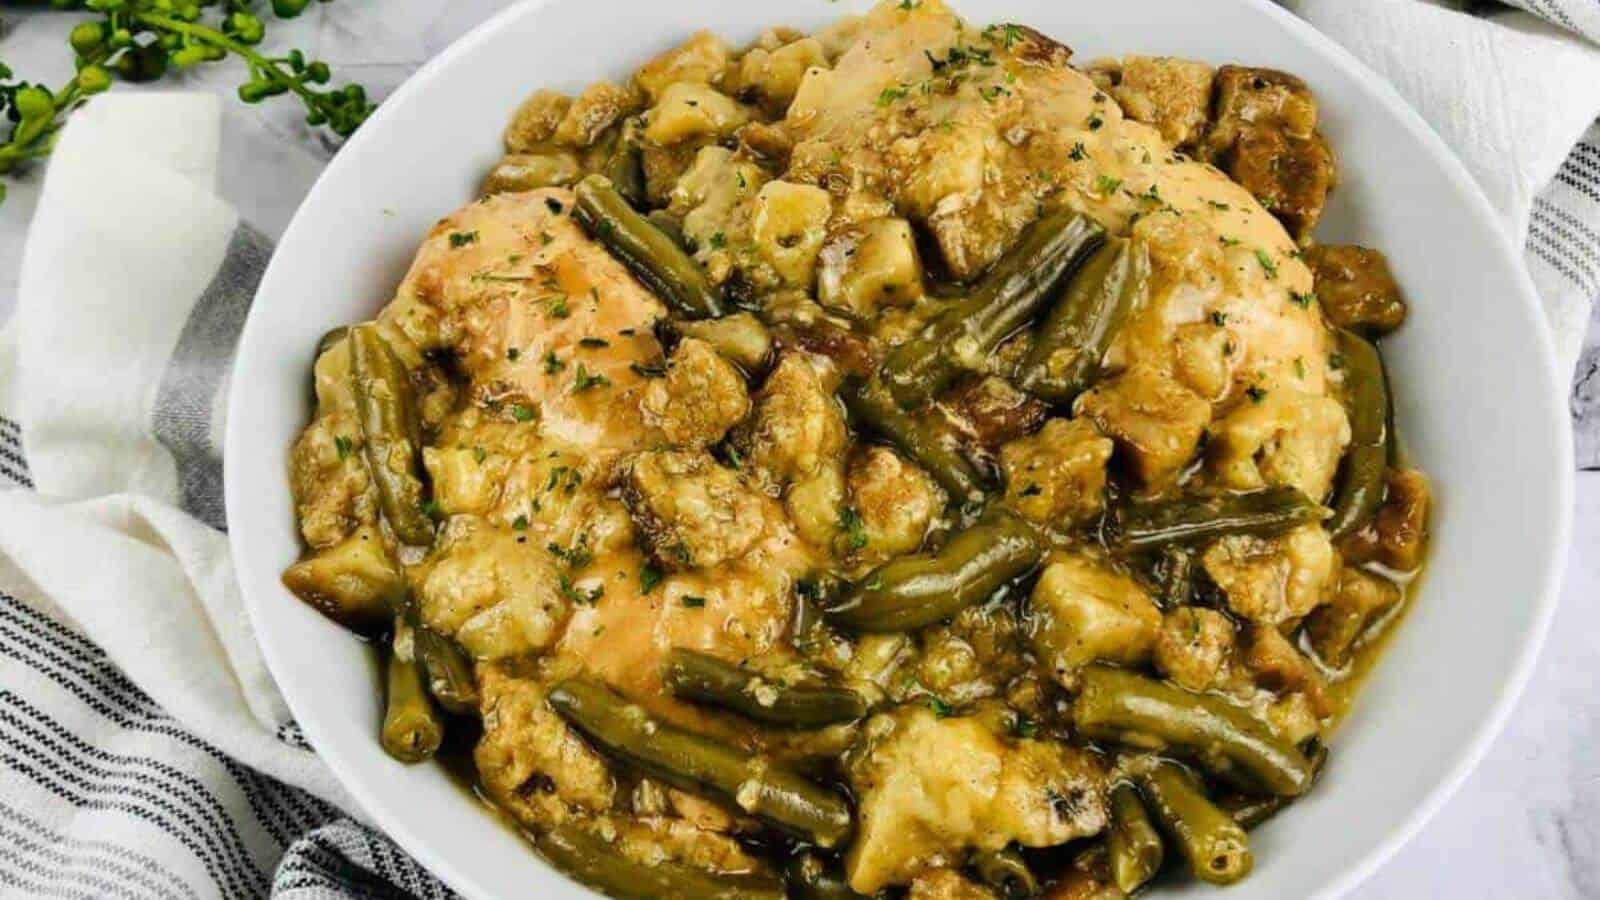 Gluten free chicken, stuffing and green beans in a white bowl.